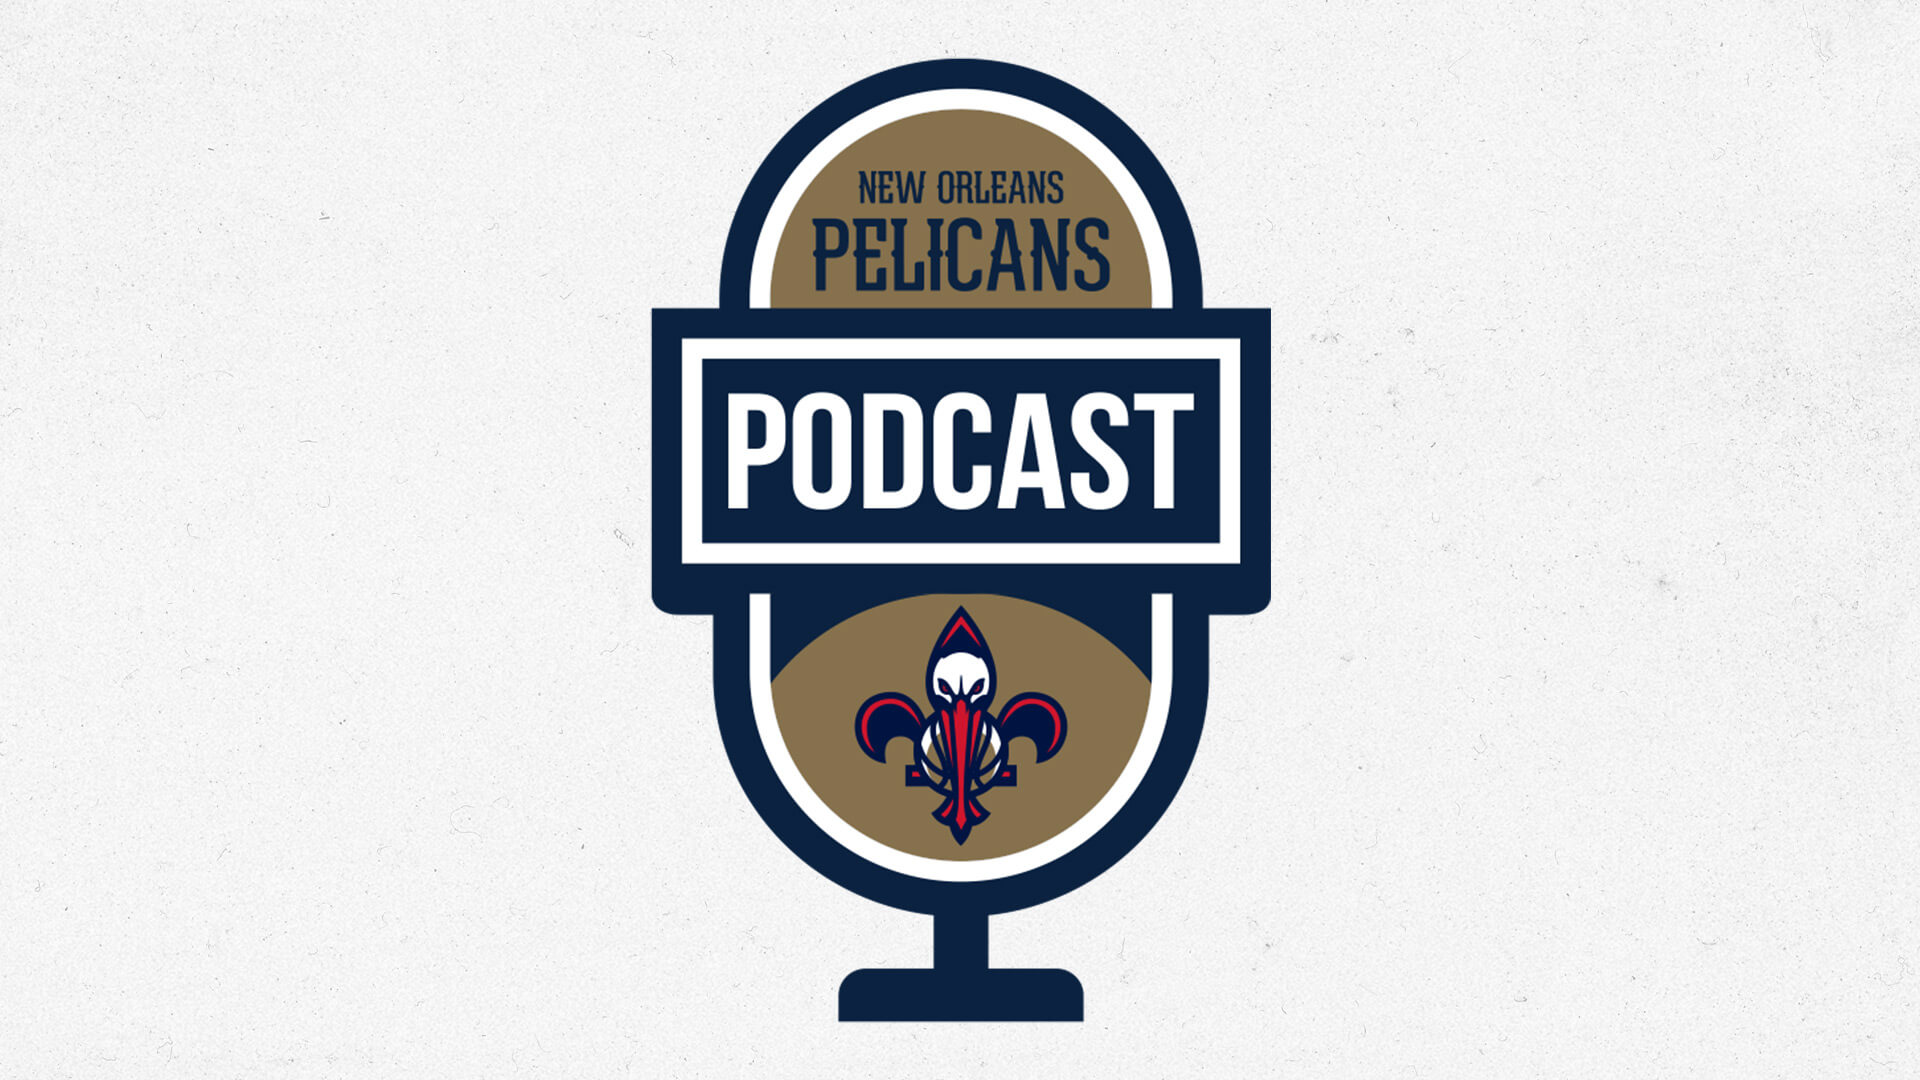 Jim Eichenhofer on Nuggets win, Western Conference NBA playoffs race | Pelicans Podcast